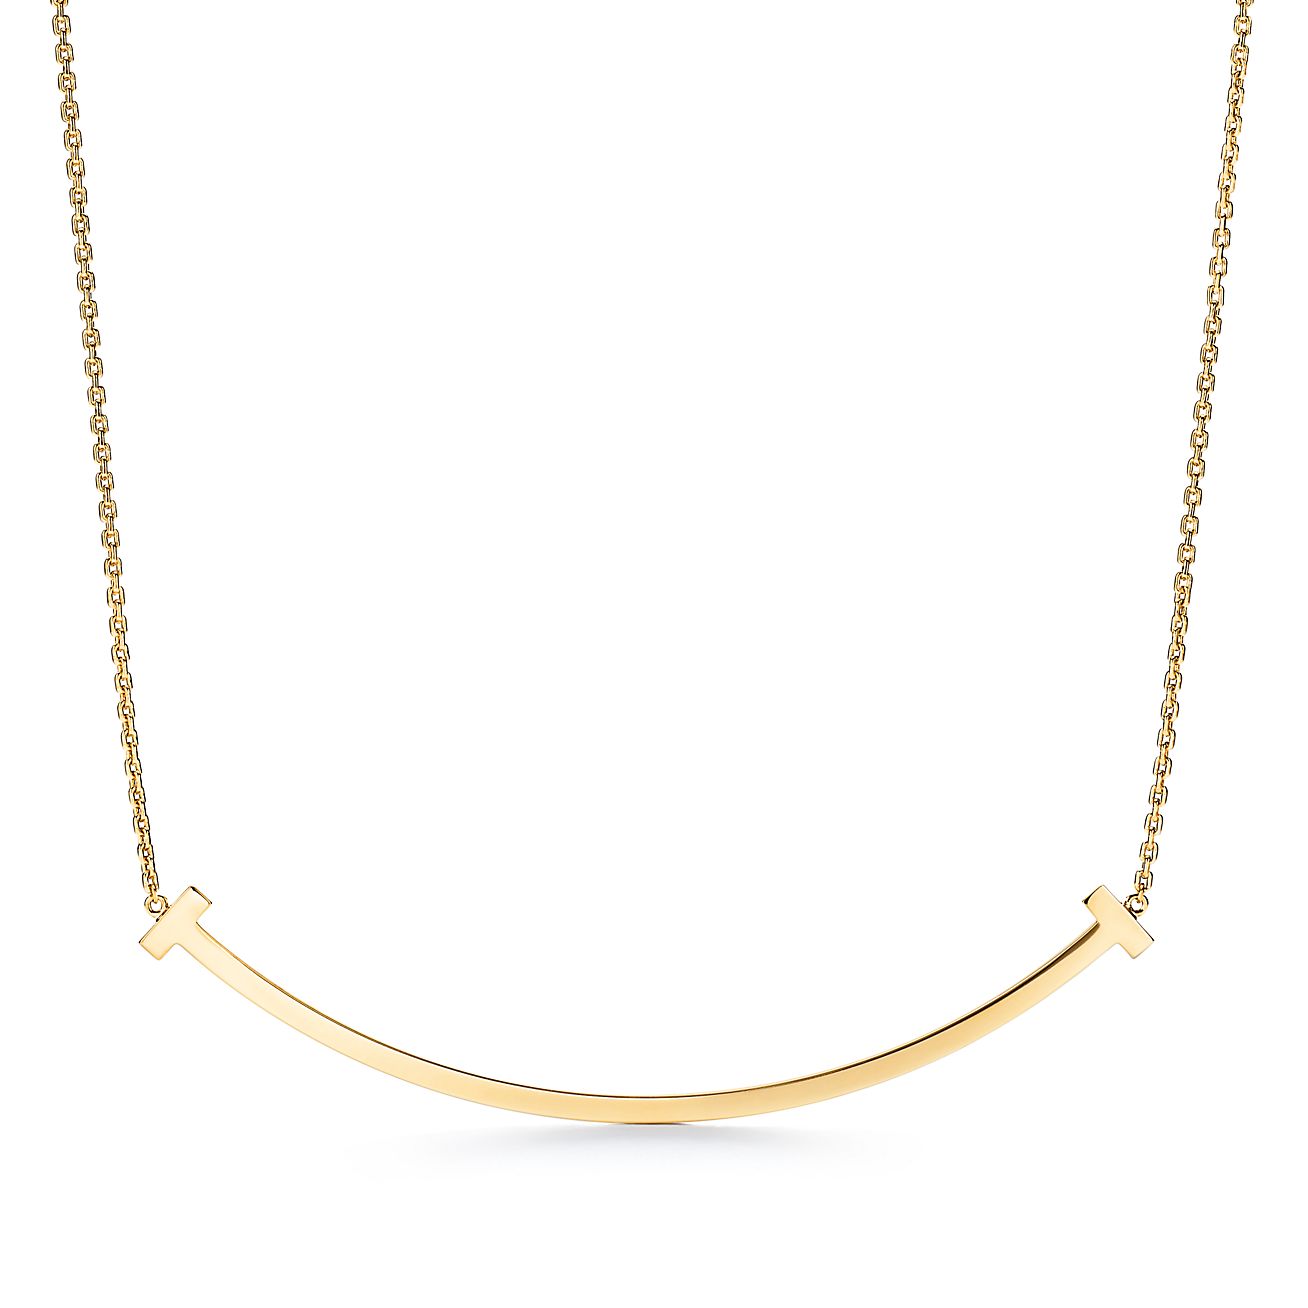 Tiffany T extra large smile pendant in 18k gold.